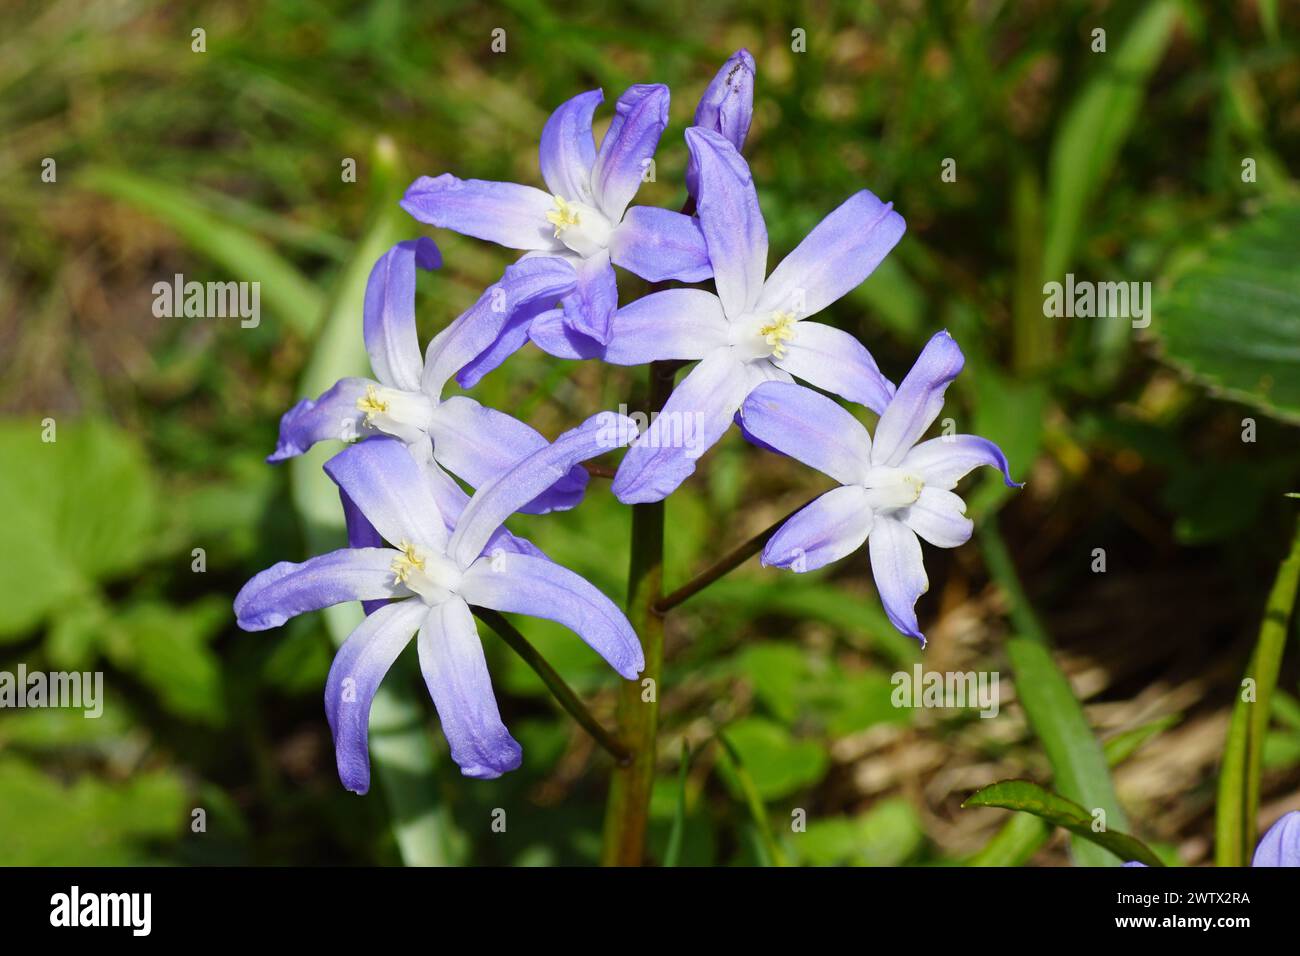 Close up of flowering Glory of the Snow (Chionodoxa luciliae), subfamily Scilloideae, family Asparagaceae. Spring, March. Dutch garden Stock Photo